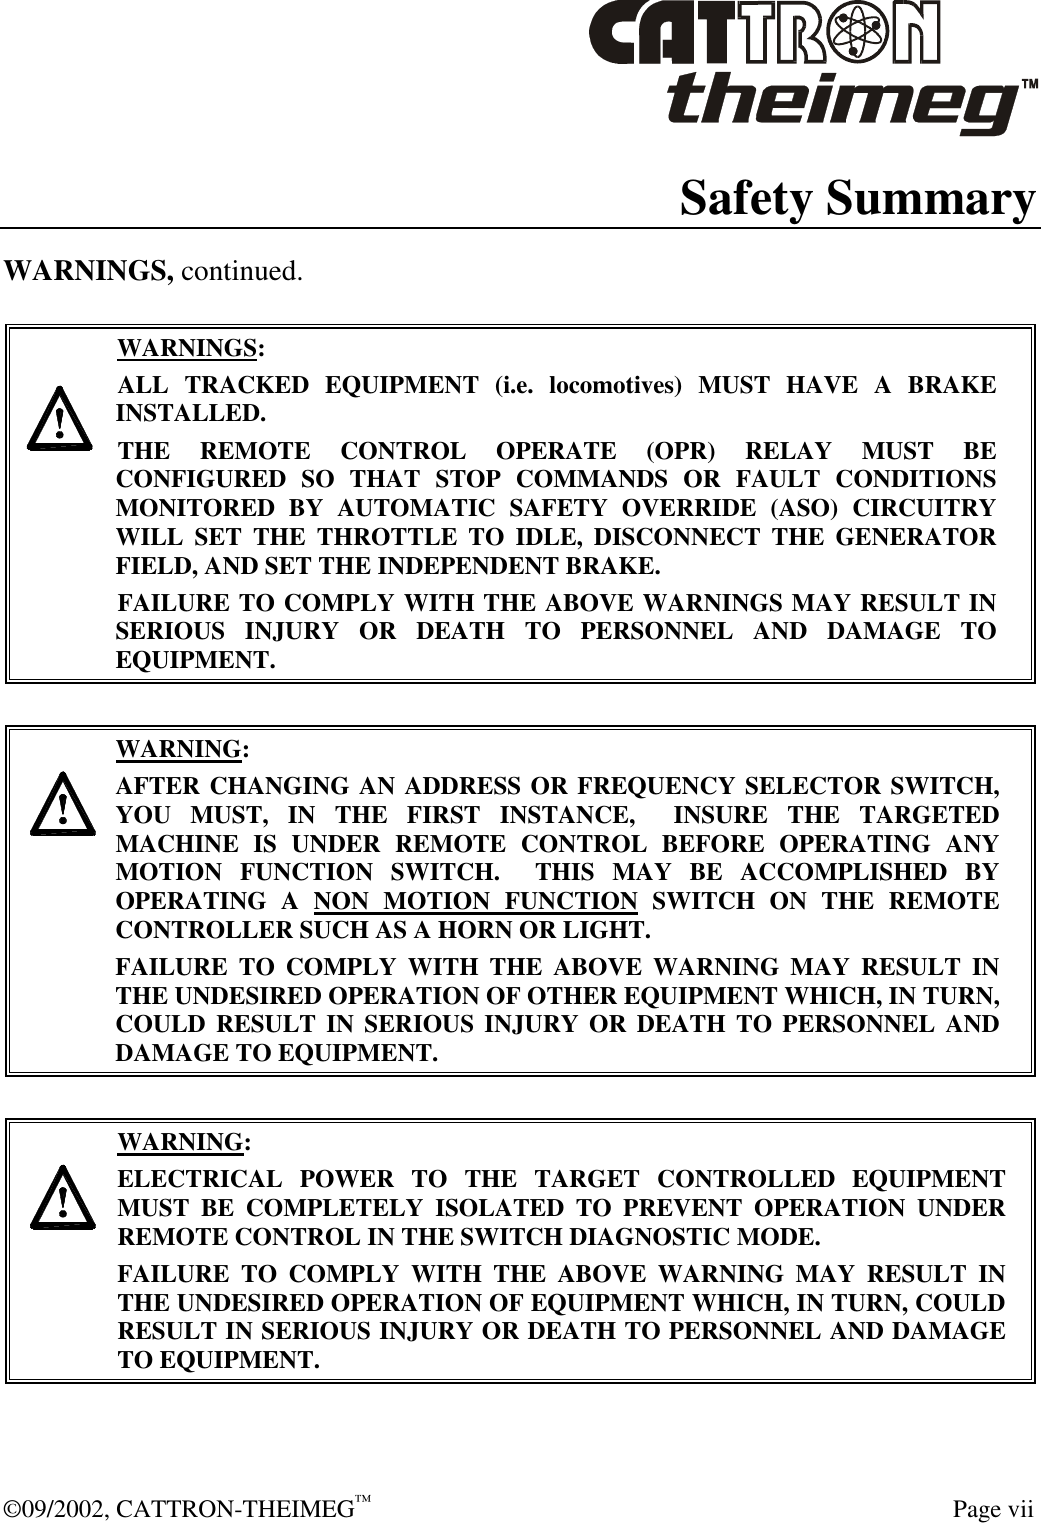  ©09/2002, CATTRON-THEIMEG™   Page vii Safety Summary WARNINGS, continued.      WARNINGS: ALL TRACKED EQUIPMENT (i.e. locomotives) MUST HAVE A BRAKE INSTALLED. THE REMOTE CONTROL OPERATE (OPR) RELAY MUST BE CONFIGURED SO THAT STOP COMMANDS OR FAULT CONDITIONS MONITORED BY AUTOMATIC SAFETY OVERRIDE (ASO) CIRCUITRY WILL SET THE THROTTLE TO IDLE, DISCONNECT THE GENERATOR FIELD, AND SET THE INDEPENDENT BRAKE.  FAILURE TO COMPLY WITH THE ABOVE WARNINGS MAY RESULT IN SERIOUS INJURY OR DEATH TO PERSONNEL AND DAMAGE TO EQUIPMENT.       WARNING: AFTER CHANGING AN ADDRESS OR FREQUENCY SELECTOR SWITCH, YOU MUST, IN THE FIRST INSTANCE,  INSURE THE TARGETED MACHINE IS UNDER REMOTE CONTROL BEFORE OPERATING ANY MOTION FUNCTION SWITCH.  THIS MAY BE ACCOMPLISHED BY OPERATING A NON MOTION FUNCTION SWITCH ON THE REMOTE CONTROLLER SUCH AS A HORN OR LIGHT.  FAILURE TO COMPLY WITH THE ABOVE WARNING MAY RESULT IN THE UNDESIRED OPERATION OF OTHER EQUIPMENT WHICH, IN TURN, COULD RESULT IN SERIOUS INJURY OR DEATH TO PERSONNEL AND DAMAGE TO EQUIPMENT.       WARNING: ELECTRICAL POWER TO THE TARGET CONTROLLED EQUIPMENT MUST BE COMPLETELY ISOLATED TO PREVENT OPERATION UNDER REMOTE CONTROL IN THE SWITCH DIAGNOSTIC MODE.  FAILURE TO COMPLY WITH THE ABOVE WARNING MAY RESULT IN THE UNDESIRED OPERATION OF EQUIPMENT WHICH, IN TURN, COULD RESULT IN SERIOUS INJURY OR DEATH TO PERSONNEL AND DAMAGE TO EQUIPMENT.   